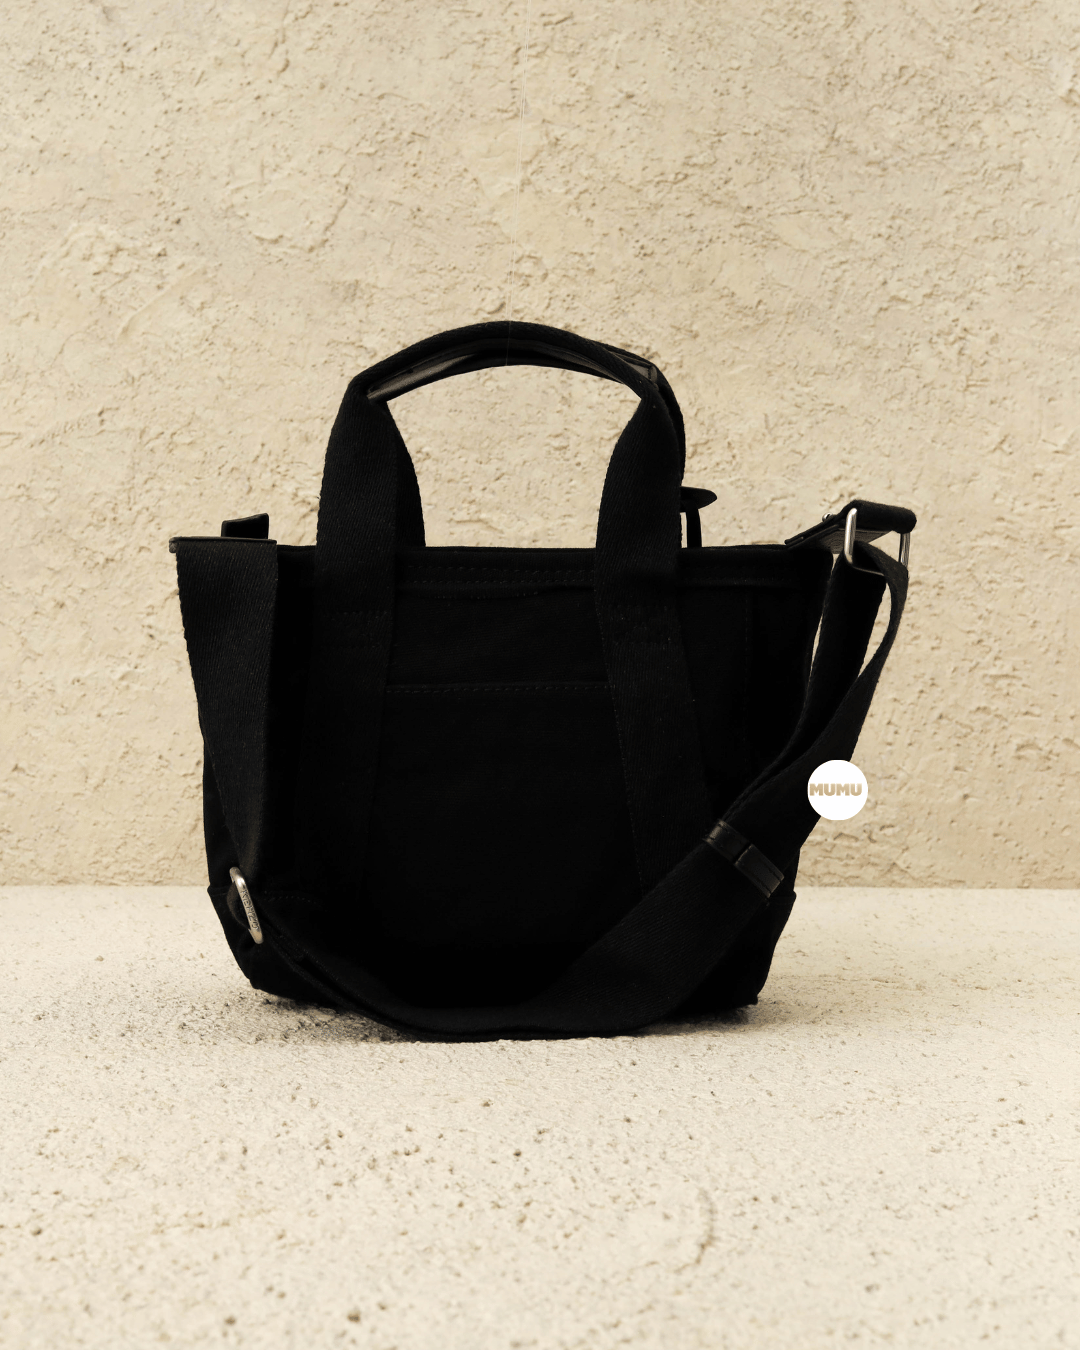 Miniature Tote Bag With Strap Black